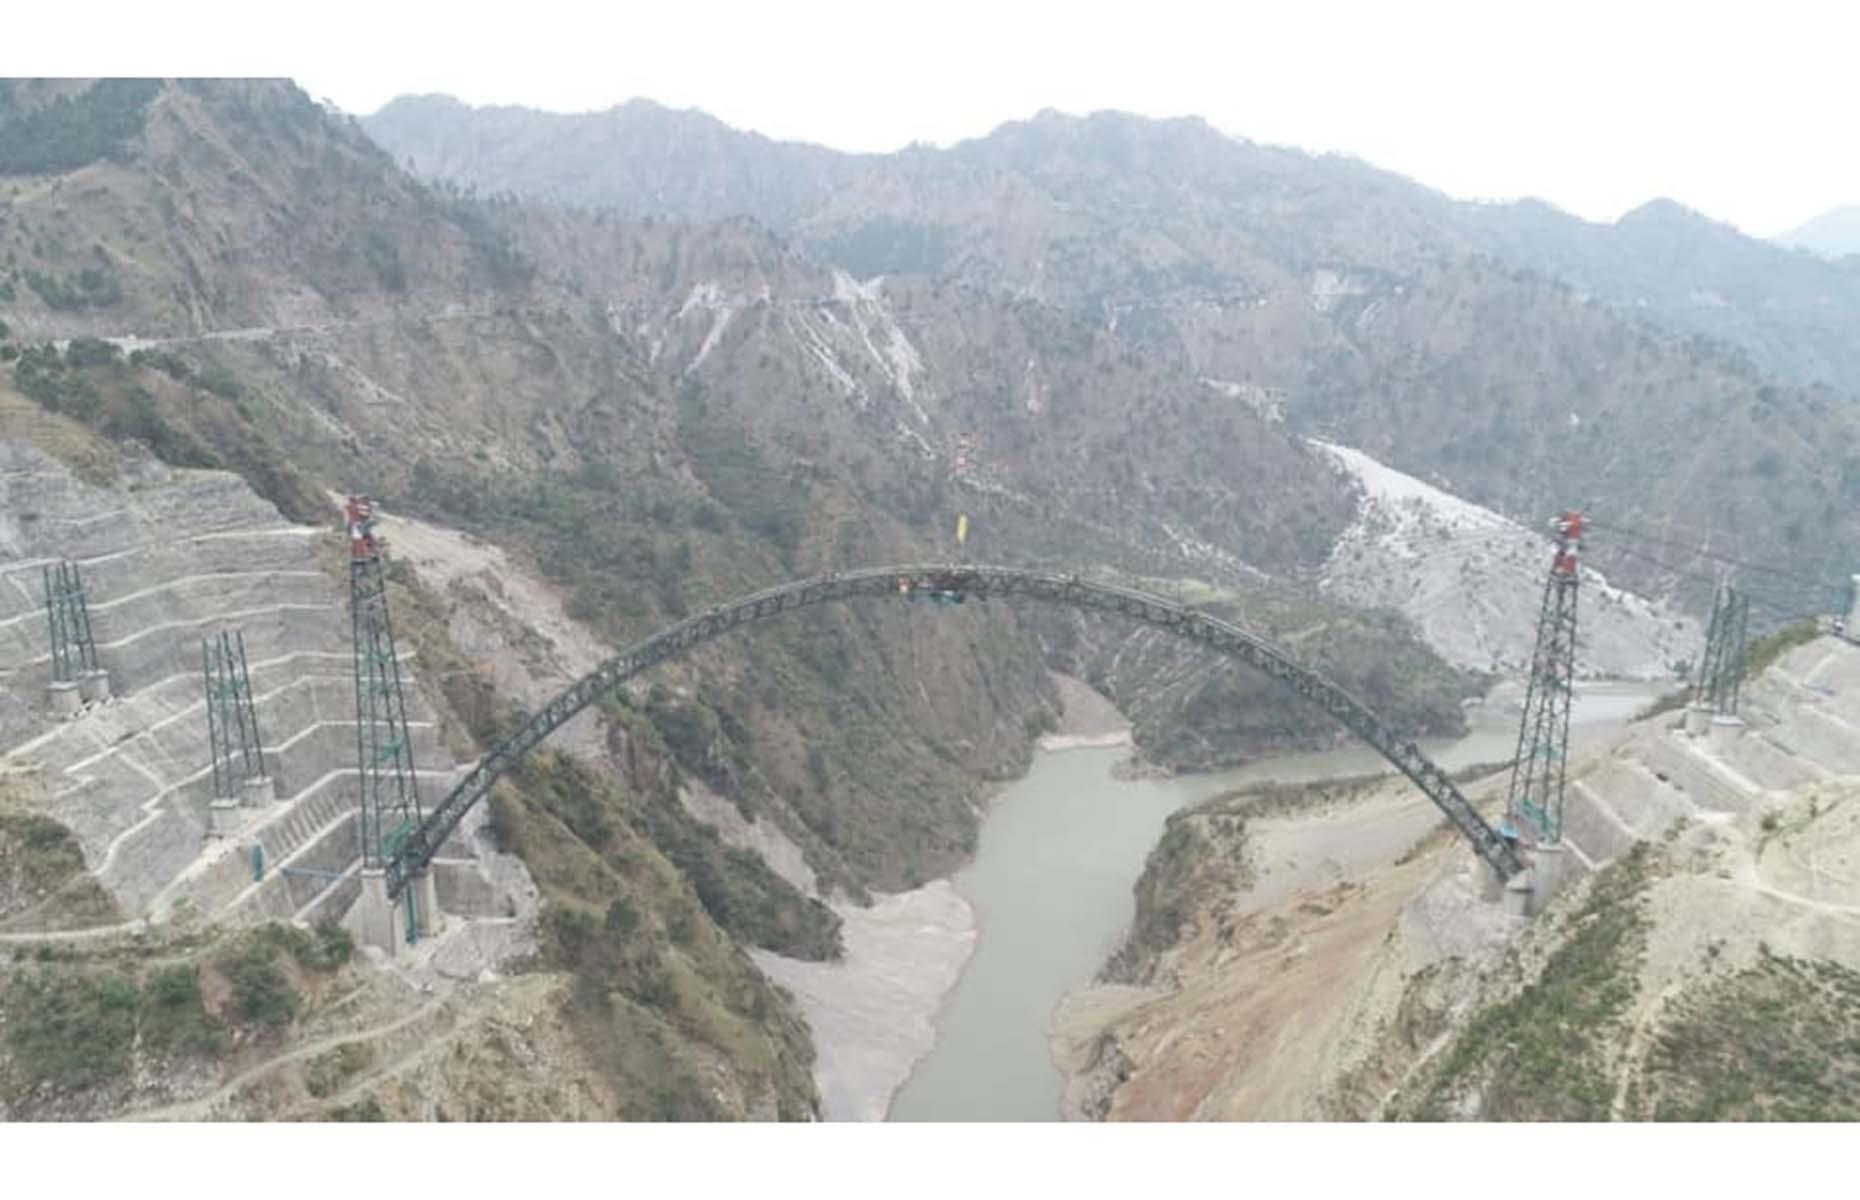 <p>In construction since 2004, this remarkable bridge across the Chenab river in India is <a href="https://economictimes.indiatimes.com/industry/transportation/railways/india-completes-arch-of-worlds-highest-railway-bridge-on-chenab-in-jammu-and-kashmir/safety-first/slideshow/81946509.cms">set to soon become the world's highest</a>. Suspended 1,178 feet (359m) above the river – that's 98 feet (30m) higher than the Eiffel Tower – the railway line crossing the bridge will connect Kashmir and Kanyakumari. The full length of the bridge is <a href="https://www.newcivilengineer.com/latest/worlds-highest-rail-bridge-takes-shape-30-04-2021/">1,532 feet (1,315m)</a> and is surely going to make for a spine-tingling ride.</p>  <p><a href="https://www.loveexploring.com/galleries/104228/breathtaking-bridges-you-can-walk-across?page=1"><strong>You can walk across these breathtaking bridges</strong></a></p>